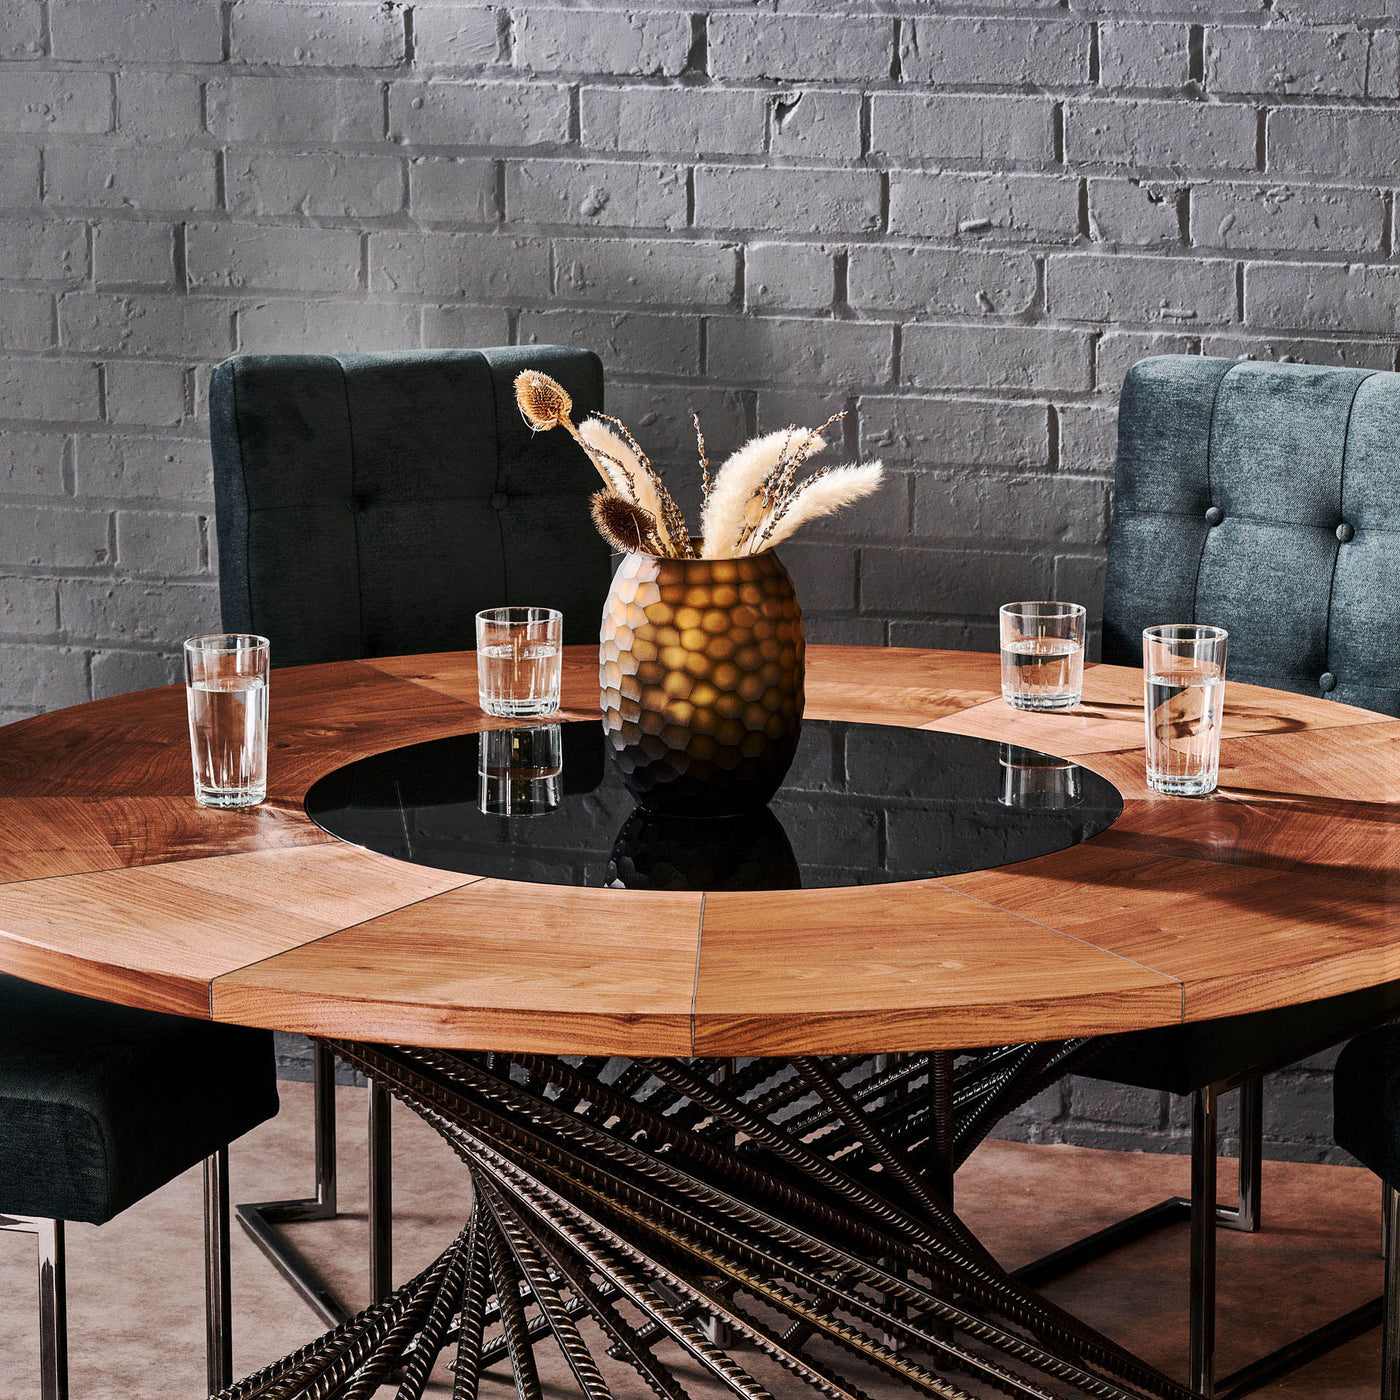 Industrial Dining Table with Handcrafted Rebar Leg Design Plus Wood and Glass Tabletop